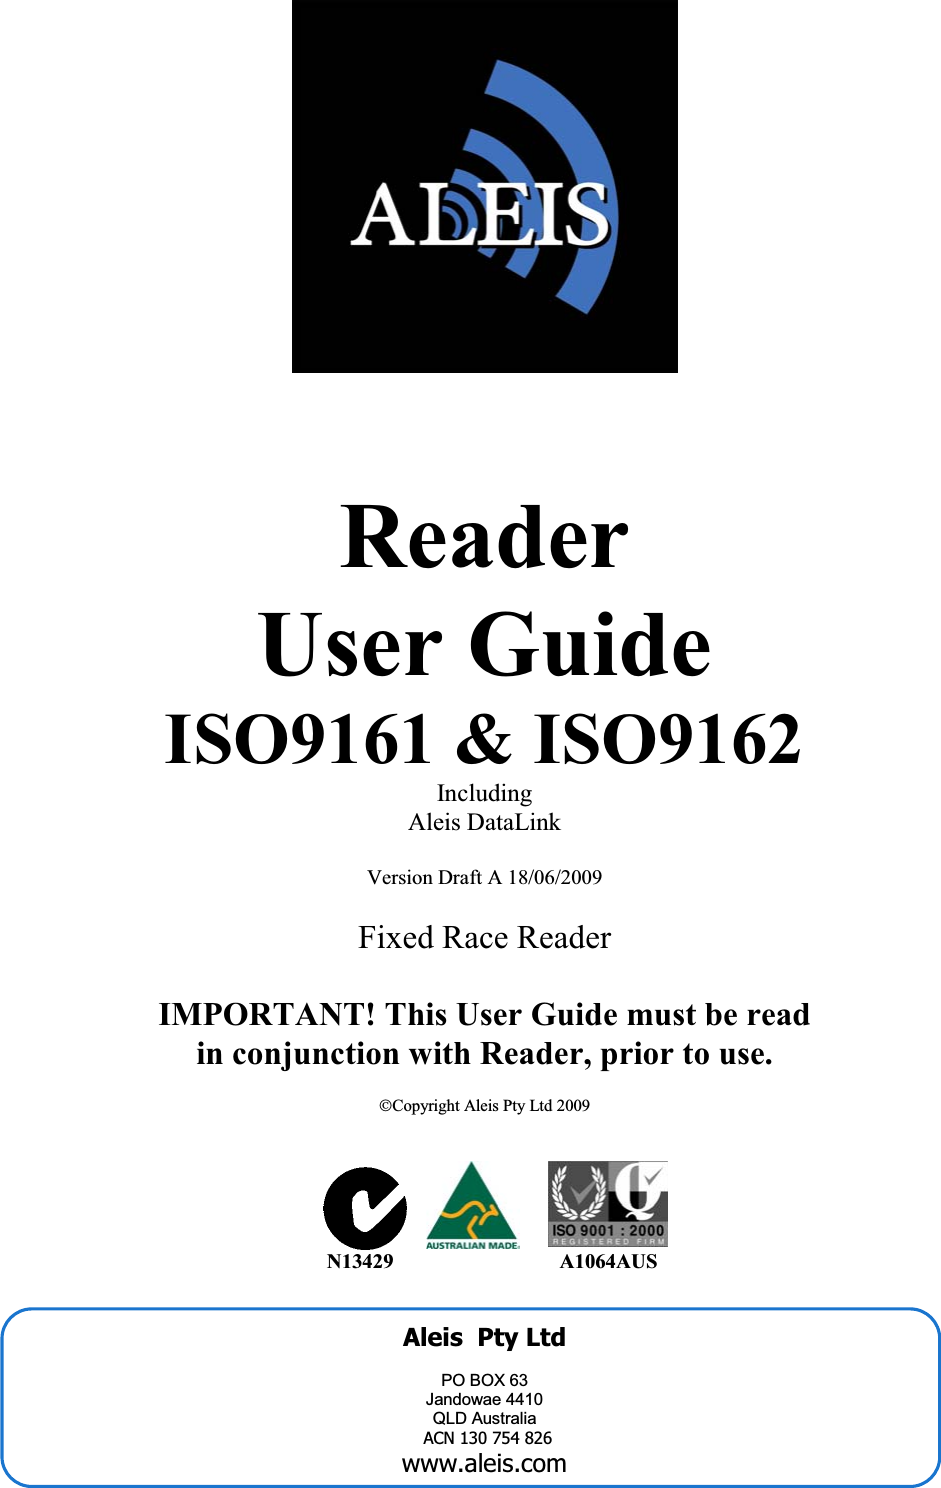         Reader  User Guide ISO9161 &amp; ISO9162  Including Aleis DataLink  Version Draft A 18/06/2009  Fixed Race Reader  IMPORTAT! This User Guide must be read  in conjunction with Reader, prior to use.   ©Copyright Aleis Pty Ltd 2009                                                                          13429                              A1064AUS     Aleis  Pty Ltd   PO BOX 63 Jandowae 4410 QLD Australia ACN 130 754 826 www.aleis.com 